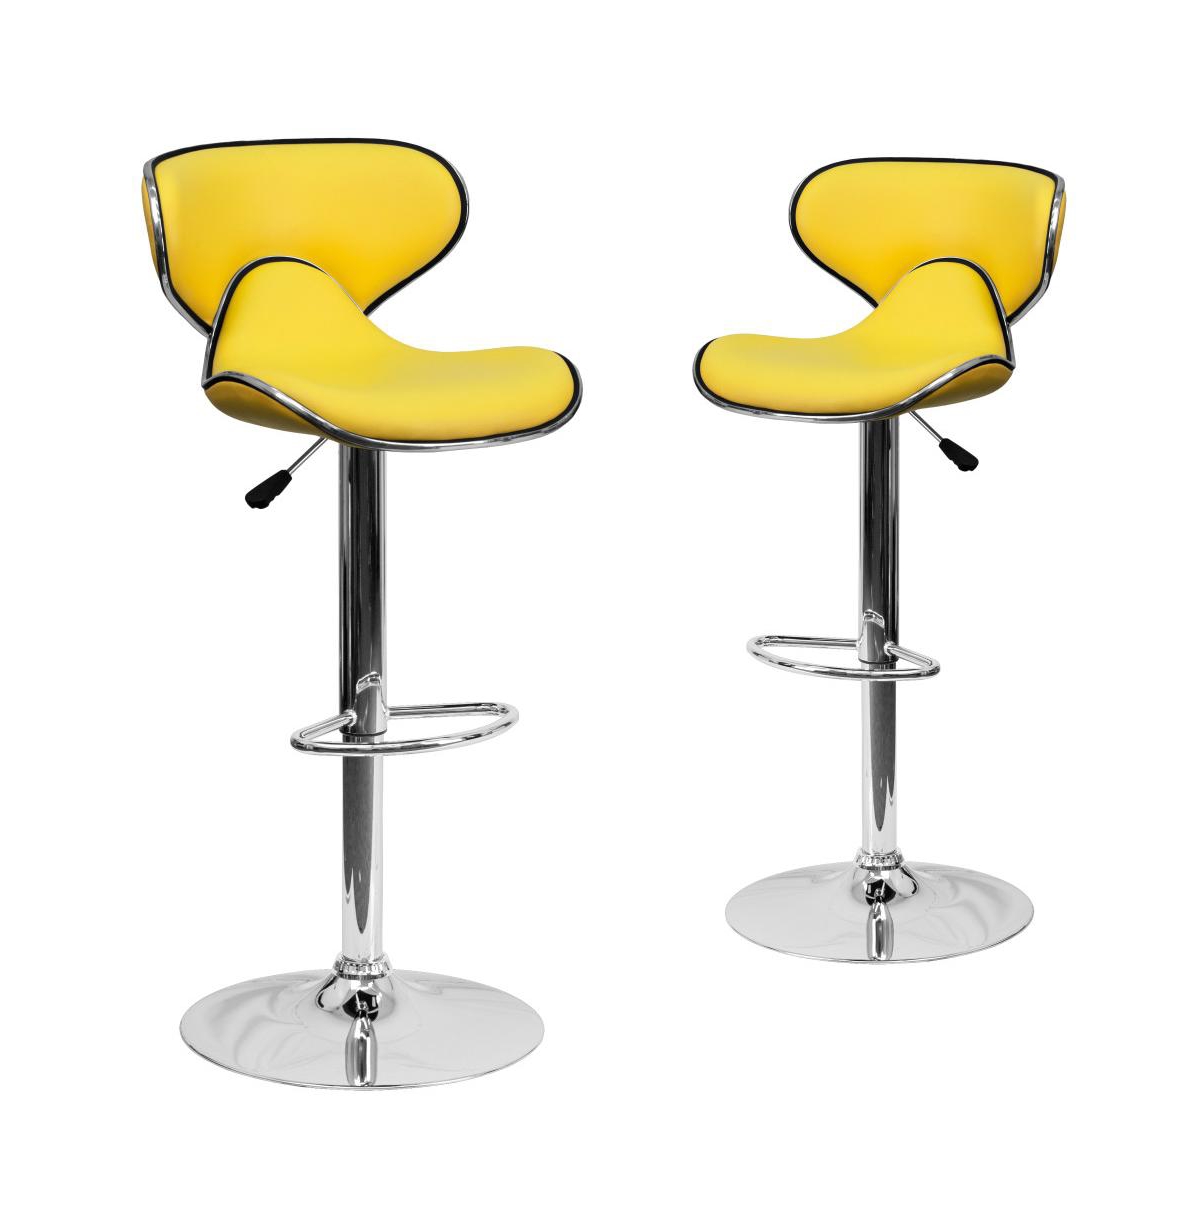 Emma+oliver 2 Pack Contemporary Cozy Mid-back Vinyl Adjustable Height Barstool With Chrome Base In Yellow